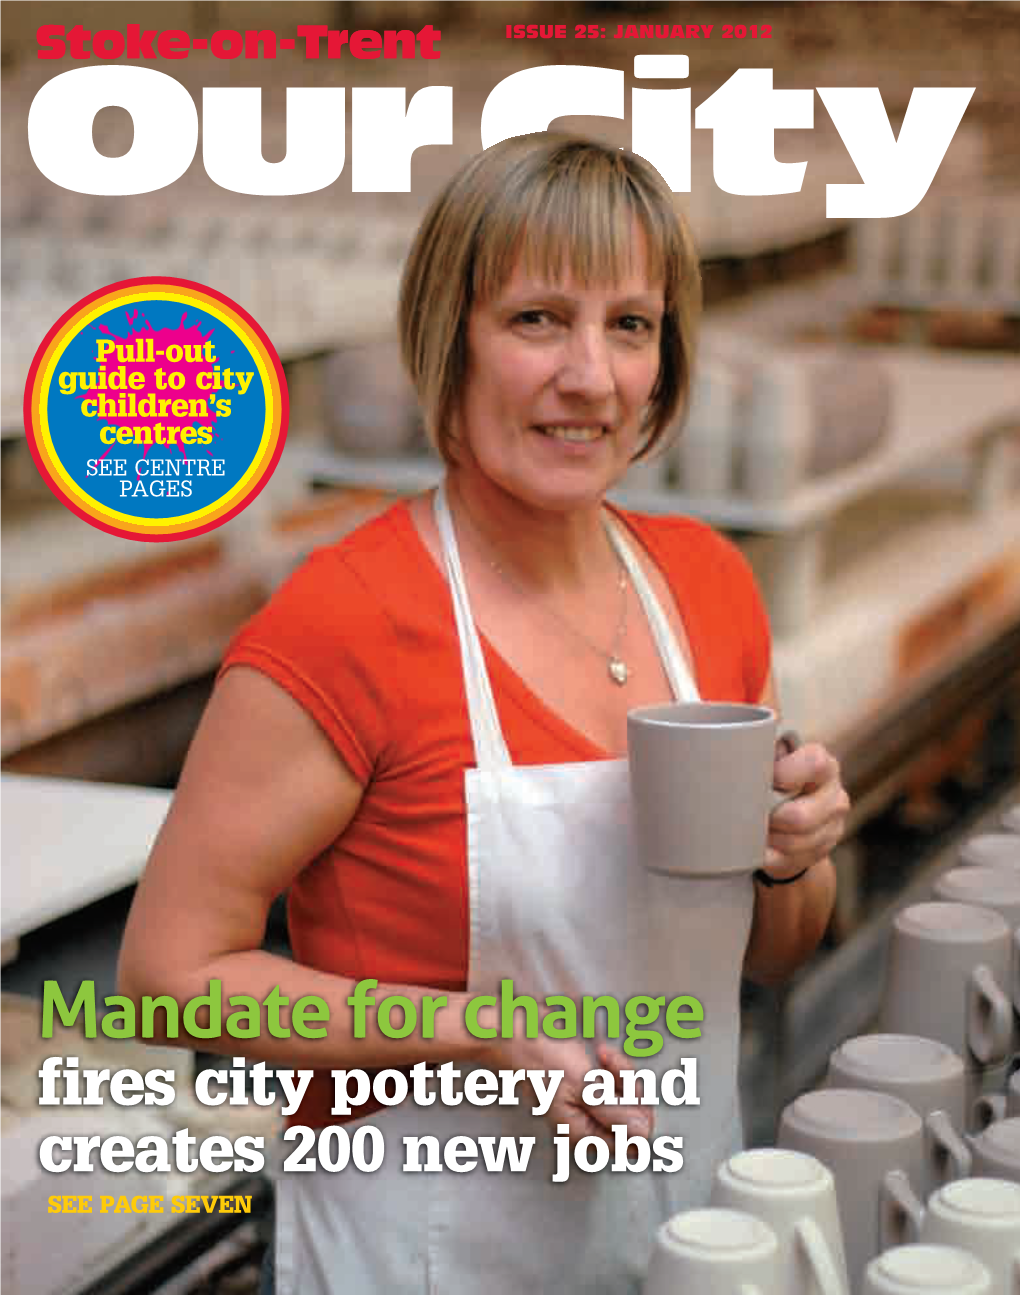 Mandate for Change Fires City Pottery and Creates 200 New Jobs SEE PAGE SEVEN Our City P2 11/1/12 15:05 Page 1